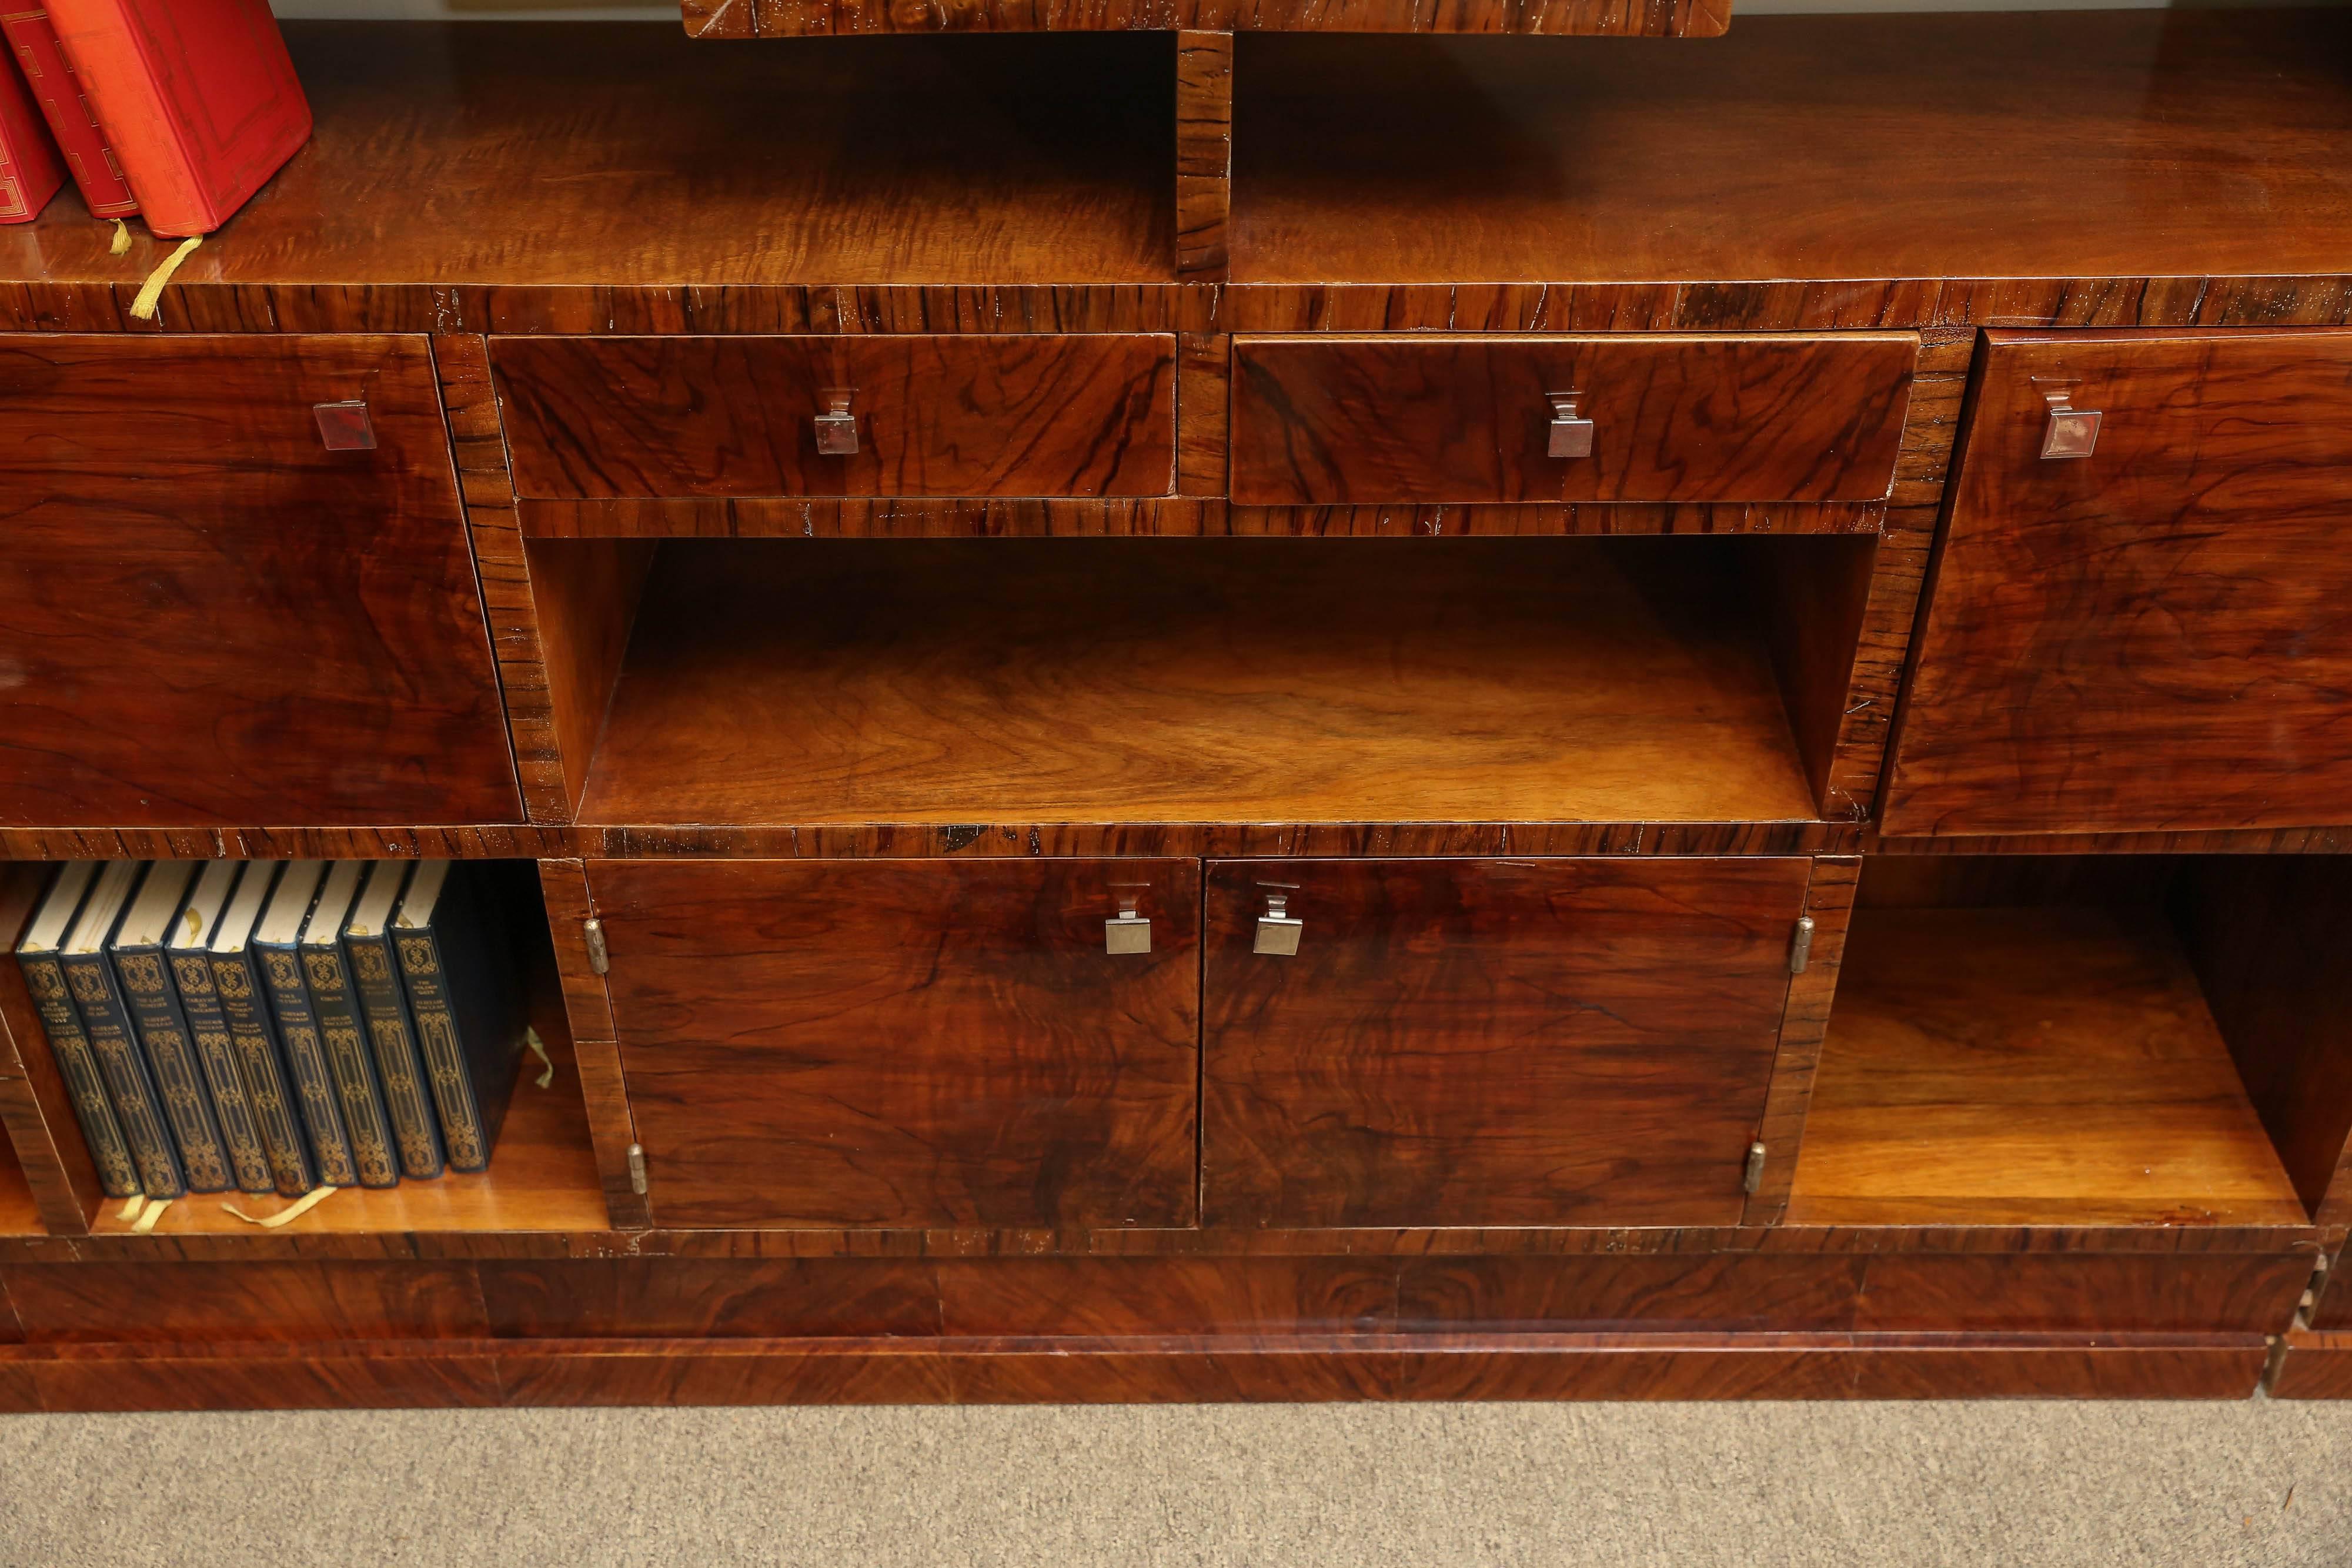 This functional Art Deco bookcase could also be used as a display case, and room divider. Fine walnut veneer in selected patterns covers this fine furniture piece. Both sides are finished and French polish applied. Having four door covered